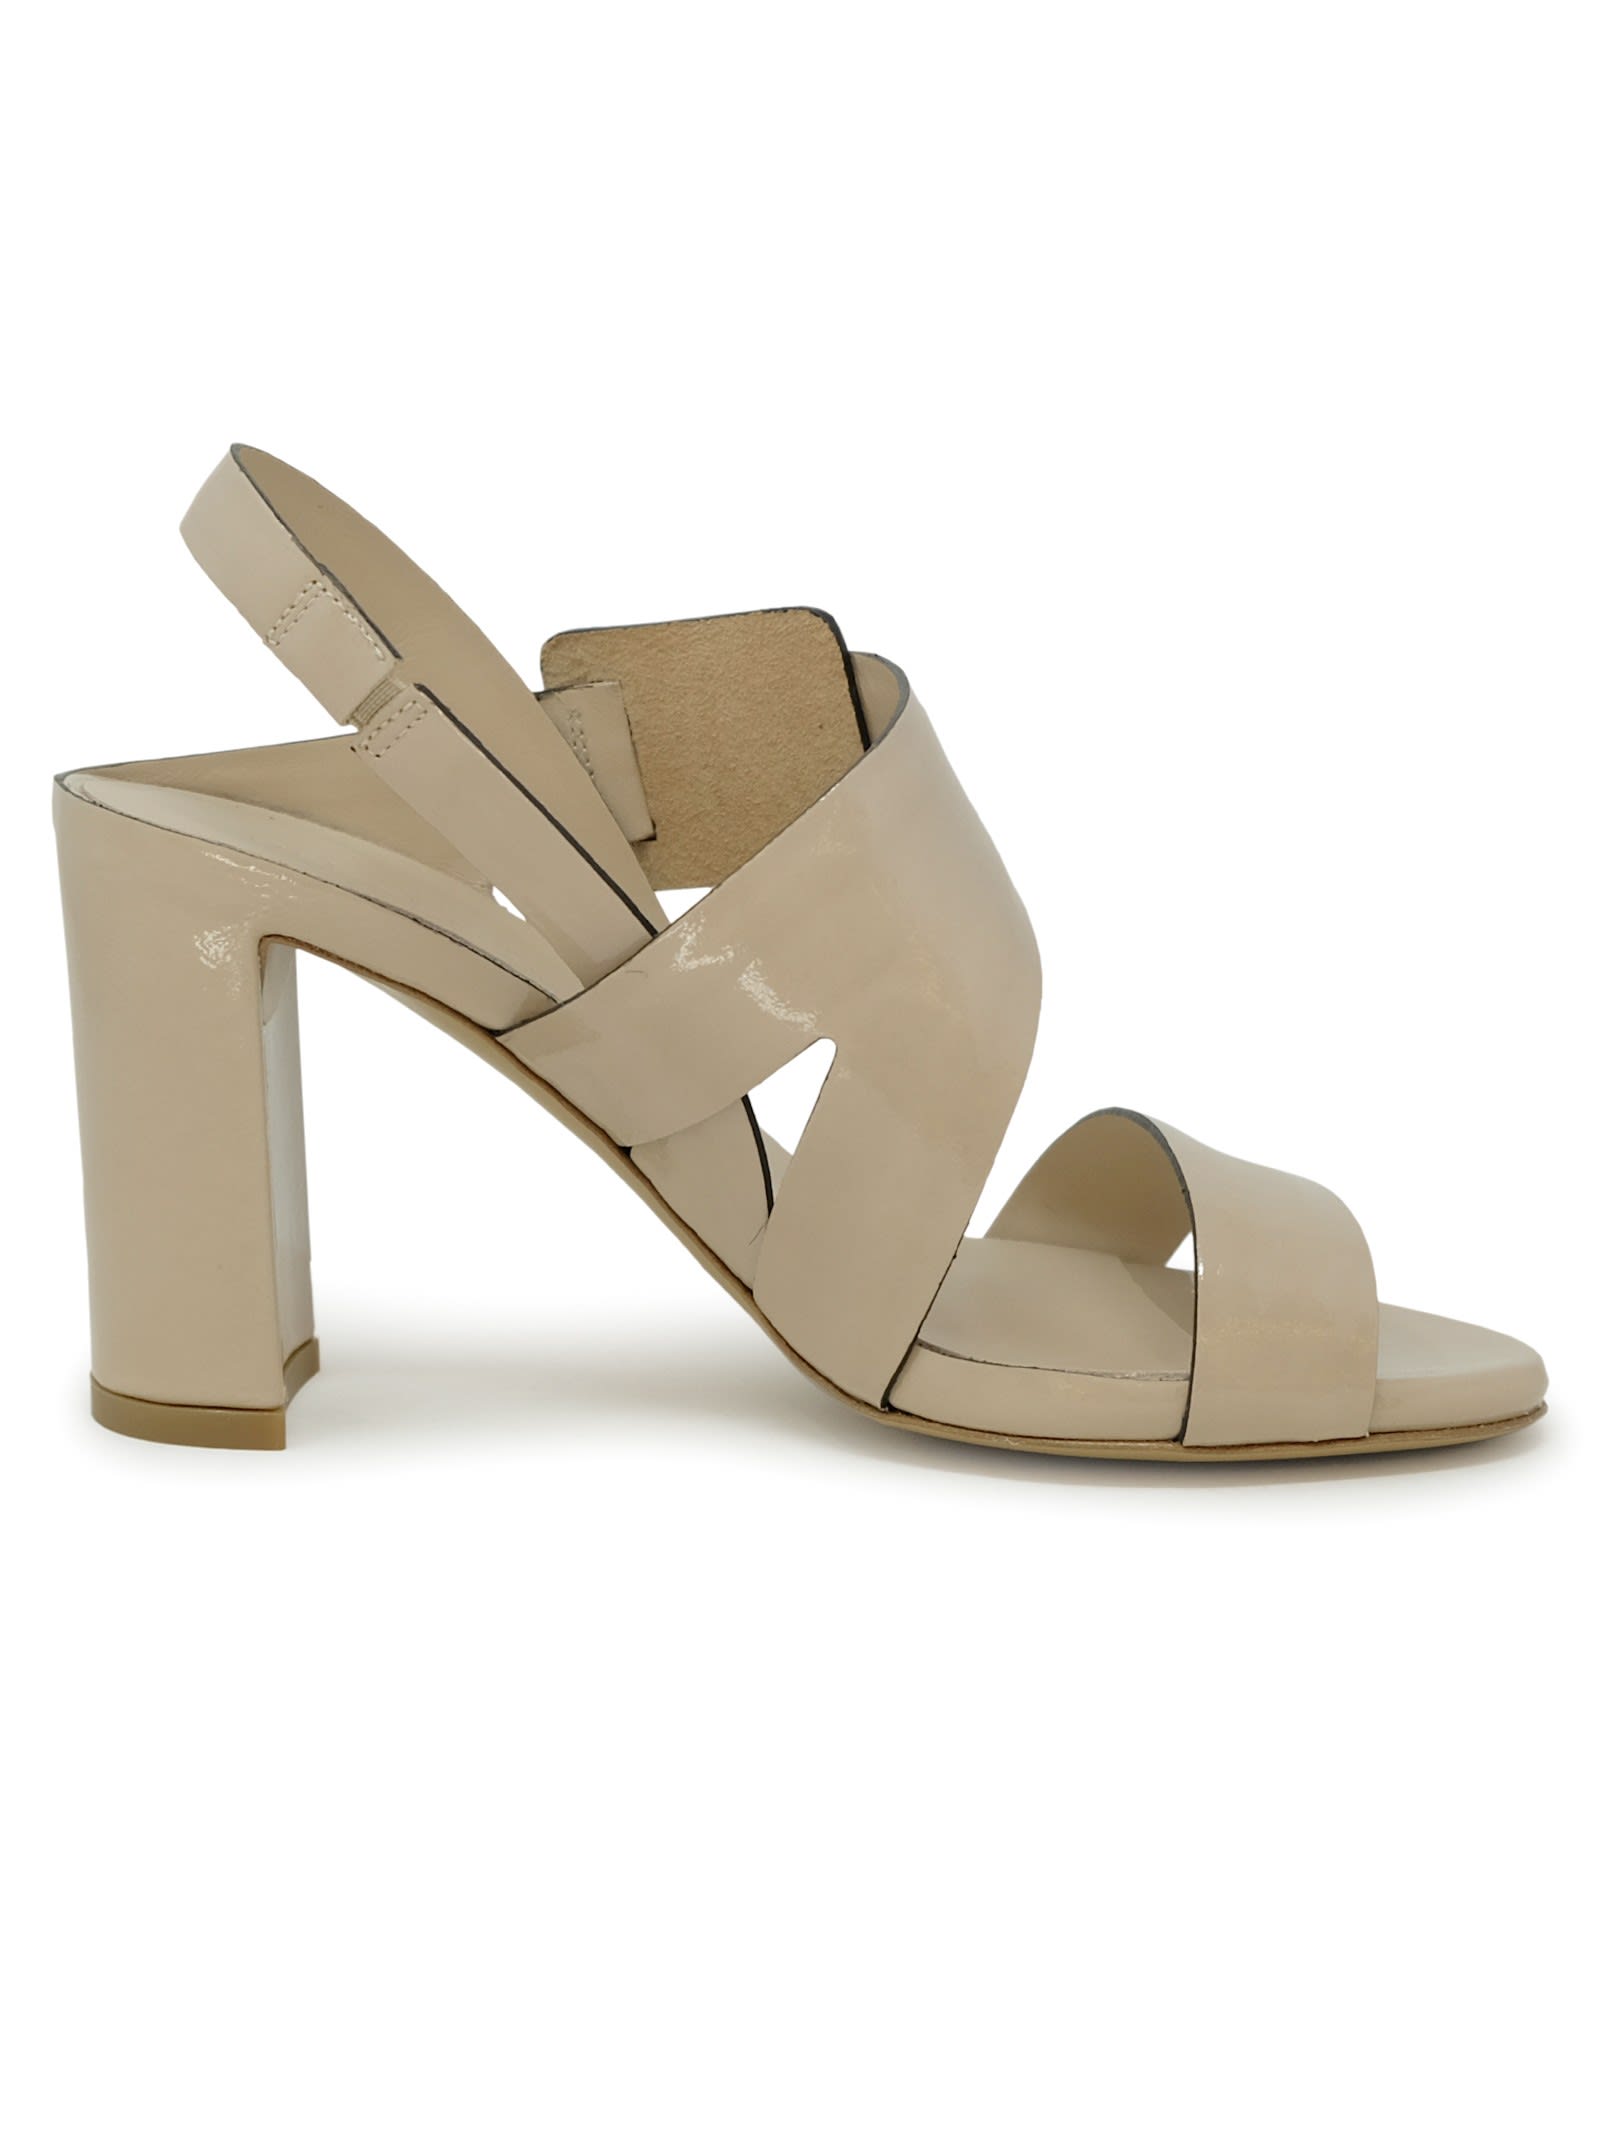 Del Carlo Dressing Gownrto  11524 Beige Patent Leather Sandals